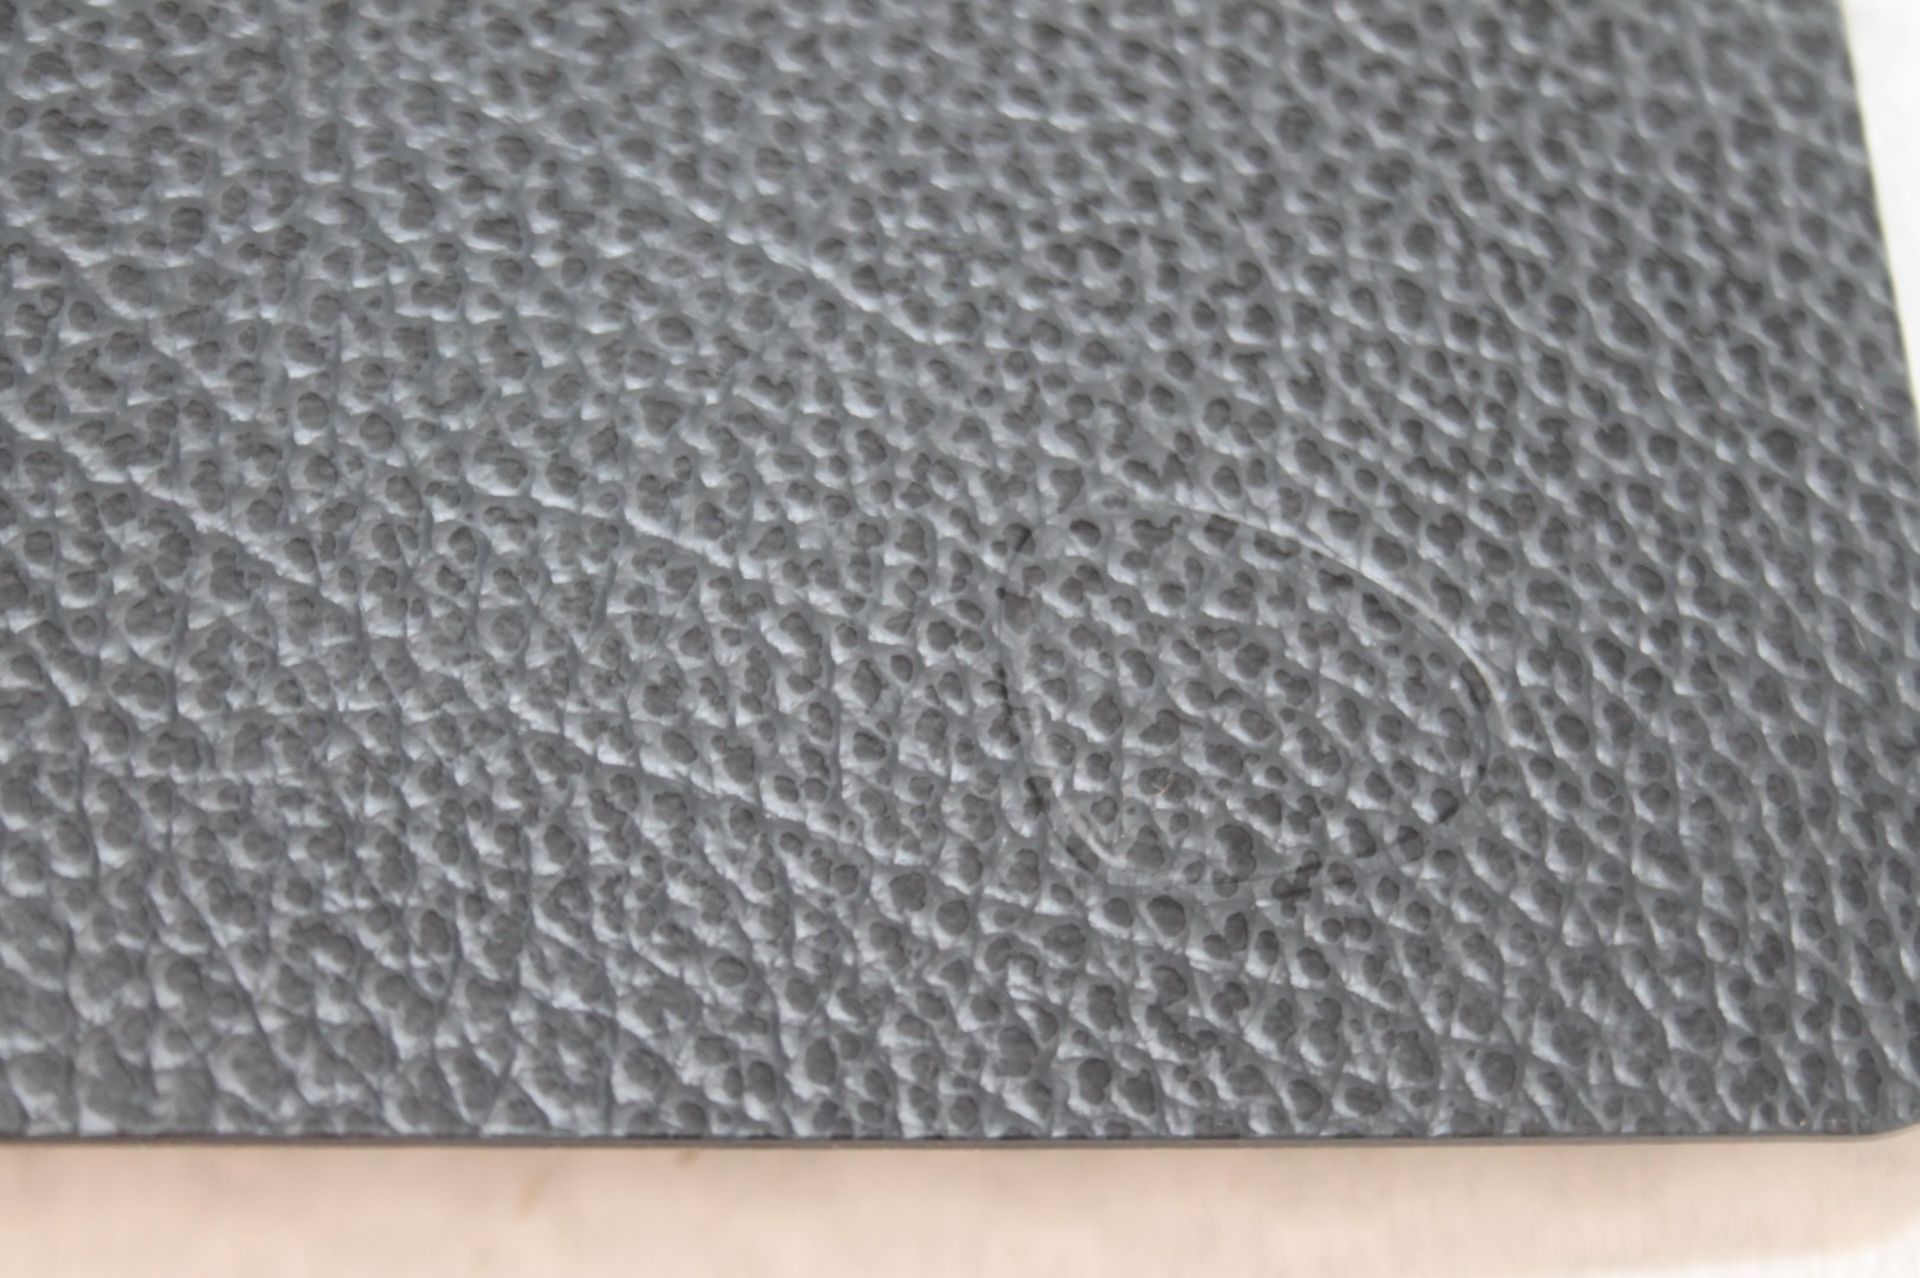 Set of 4 x LIND DNA 'Hippo' Leather Square Placemats Table Mats, In Black - Original Price £72.95 - Image 6 of 9